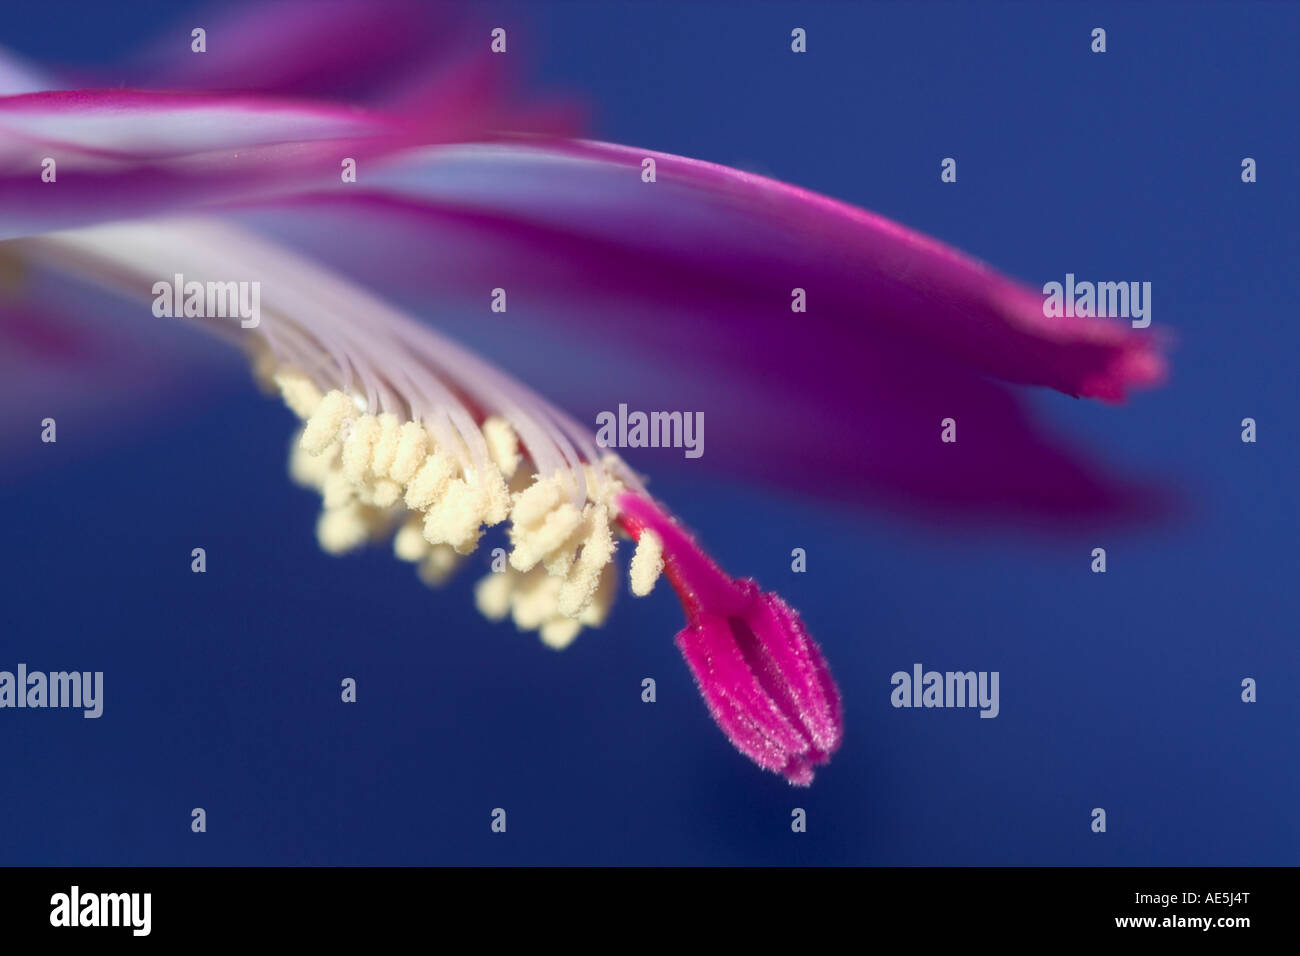 Closeup of pink Christmas cactus flower Schlumbergera truncata with pistil and stamens against a blue background Stock Photo